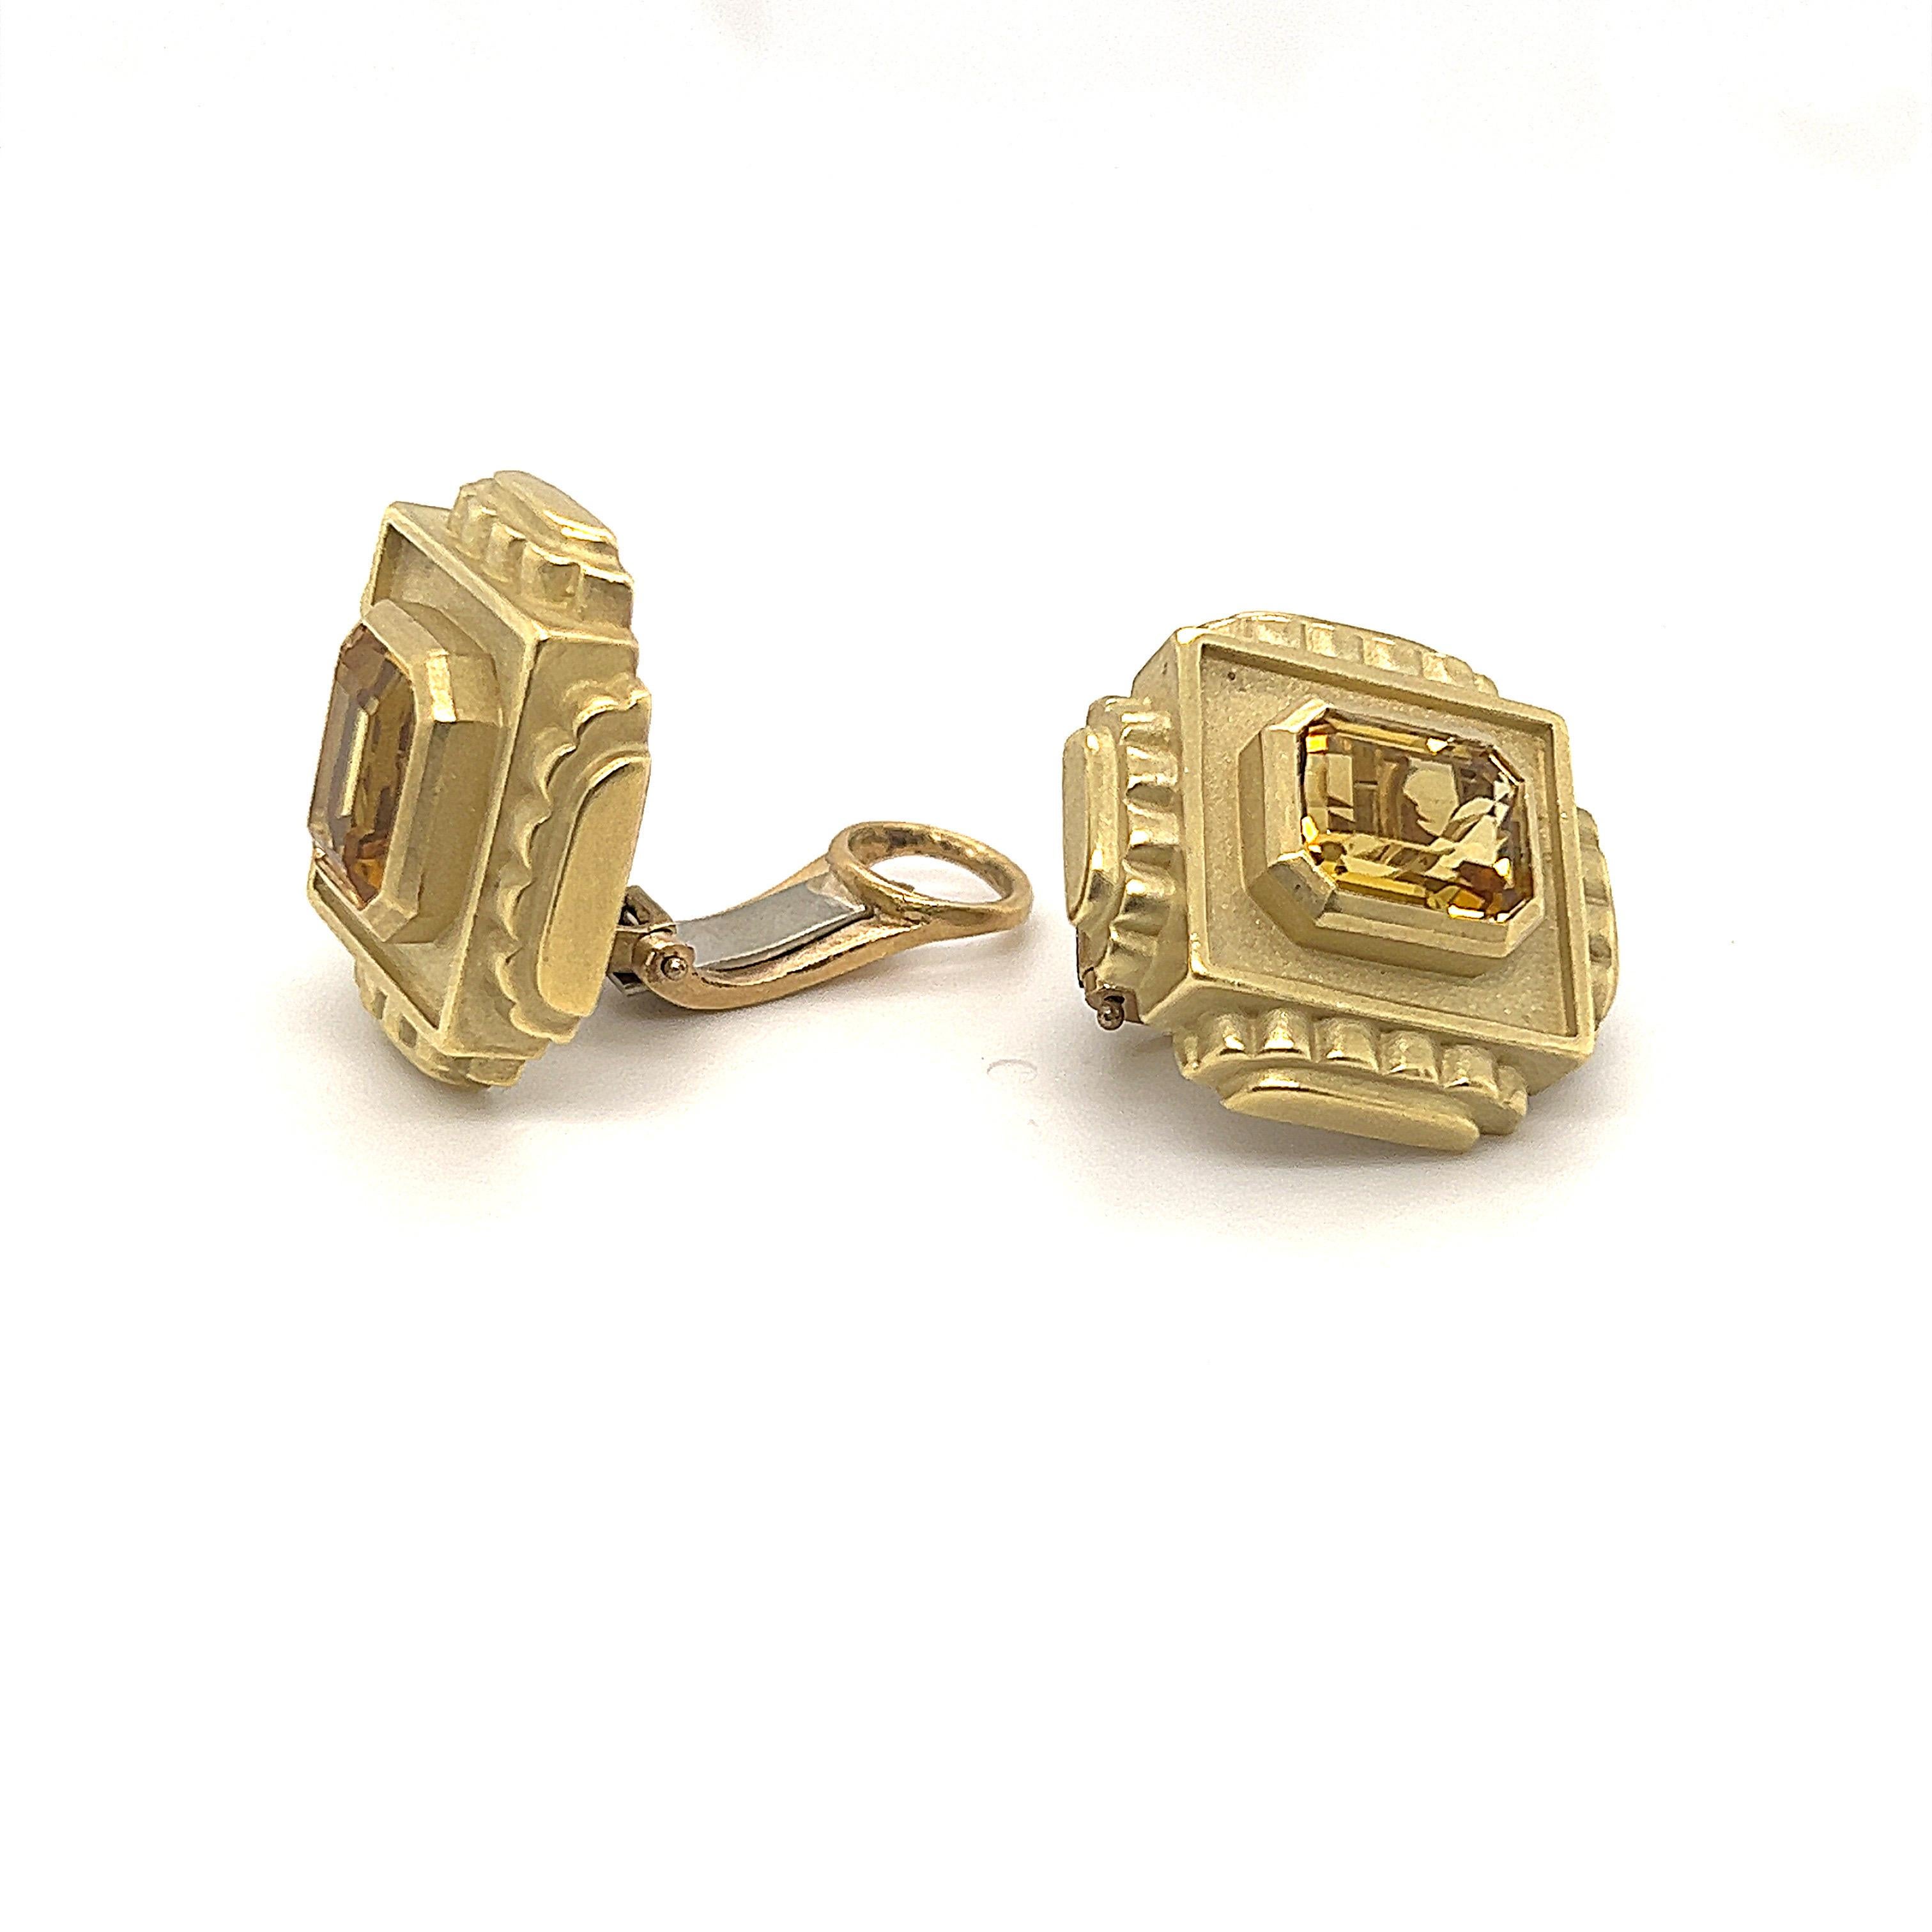 Stunning pair of 18 karat yellow gold and golden beryl earrings by Kieselstein-Cord, 1995.
Crafted in 18 karat yellow gold featuring an attractive mat finish, each earring bezel-set with an octagonal golden beryl of exquisite quality. The earrings